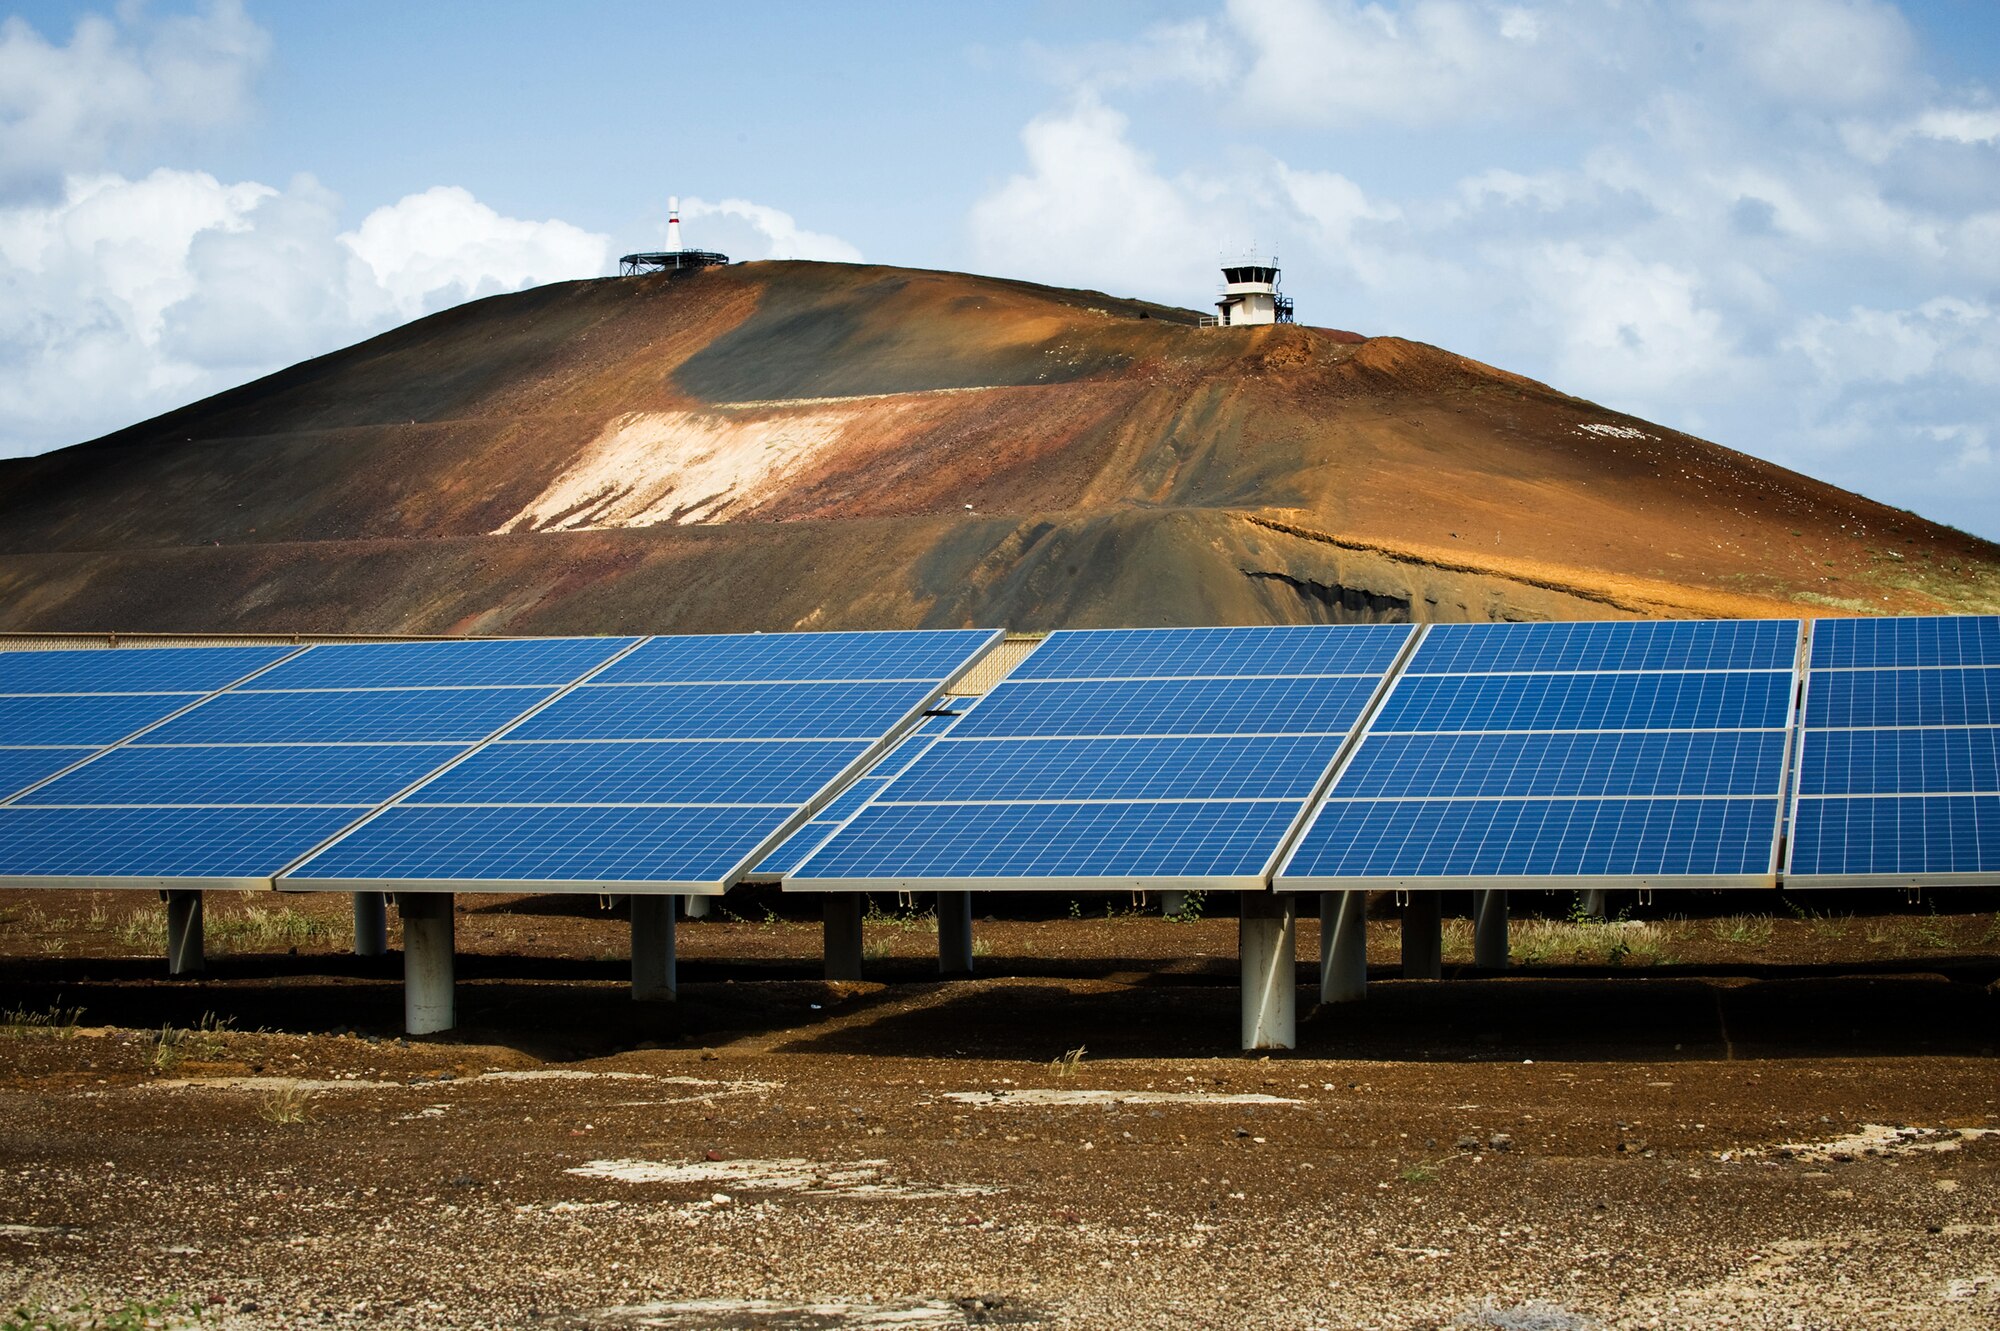 Several rows of solar panels provide power for the runway lights at Ascension Auxiliary Airfield, a small base belonging to the 45th Space Wing. The base, located on Ascension Island in the South Atlantic Ocean, has earned several awards for its energy conservation initiatives. (U.S. Air Force photo/Lance Cheung)